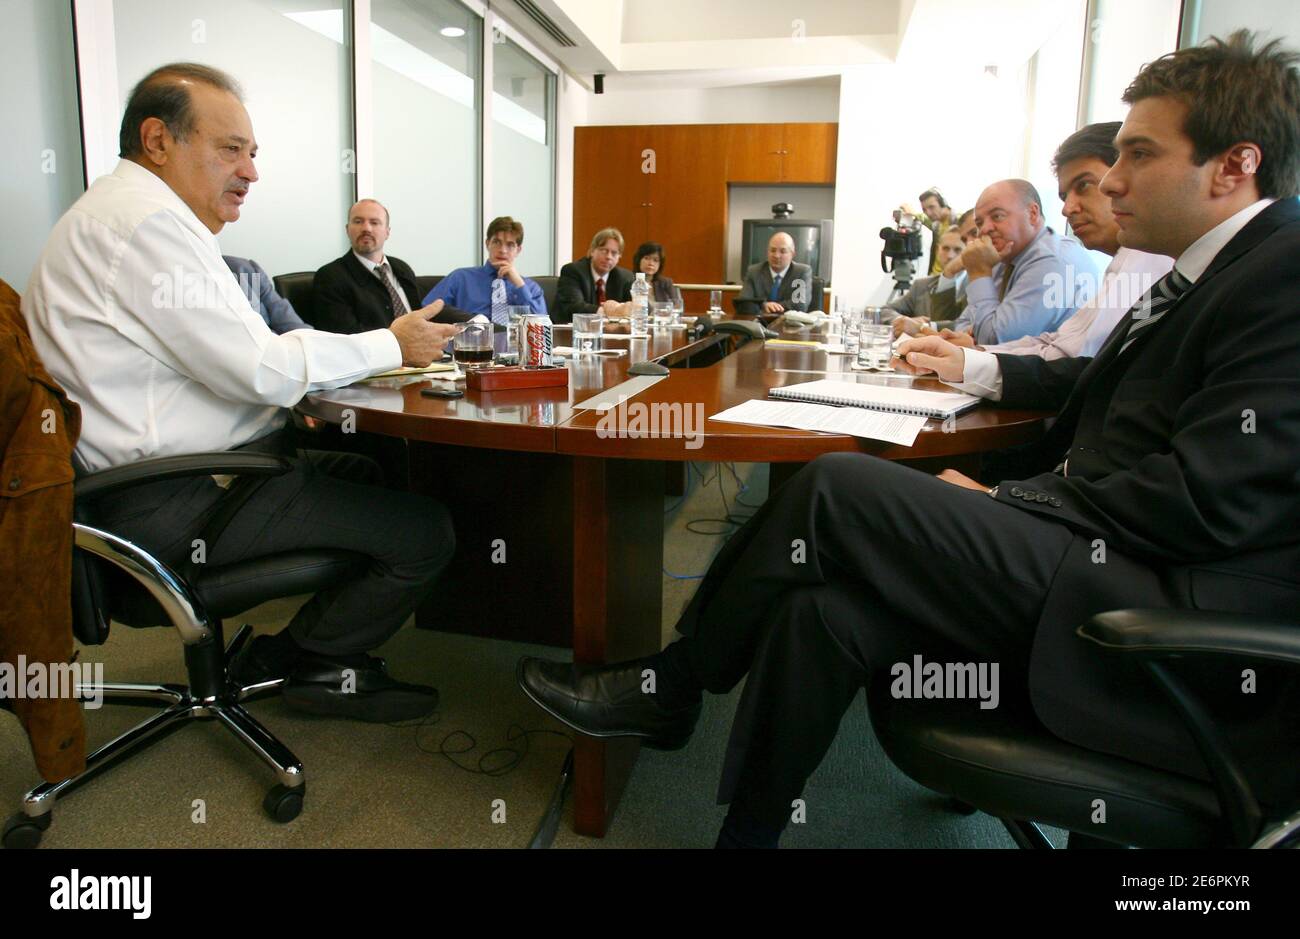 Mexican tycoon, Carlos Slim, the 3rd richest man in the world according to  Forbes, listens to a question during the Reuters Summit in Mexico City  March 24, 2006. REUTERS/Andrew Winning Stock Photo -